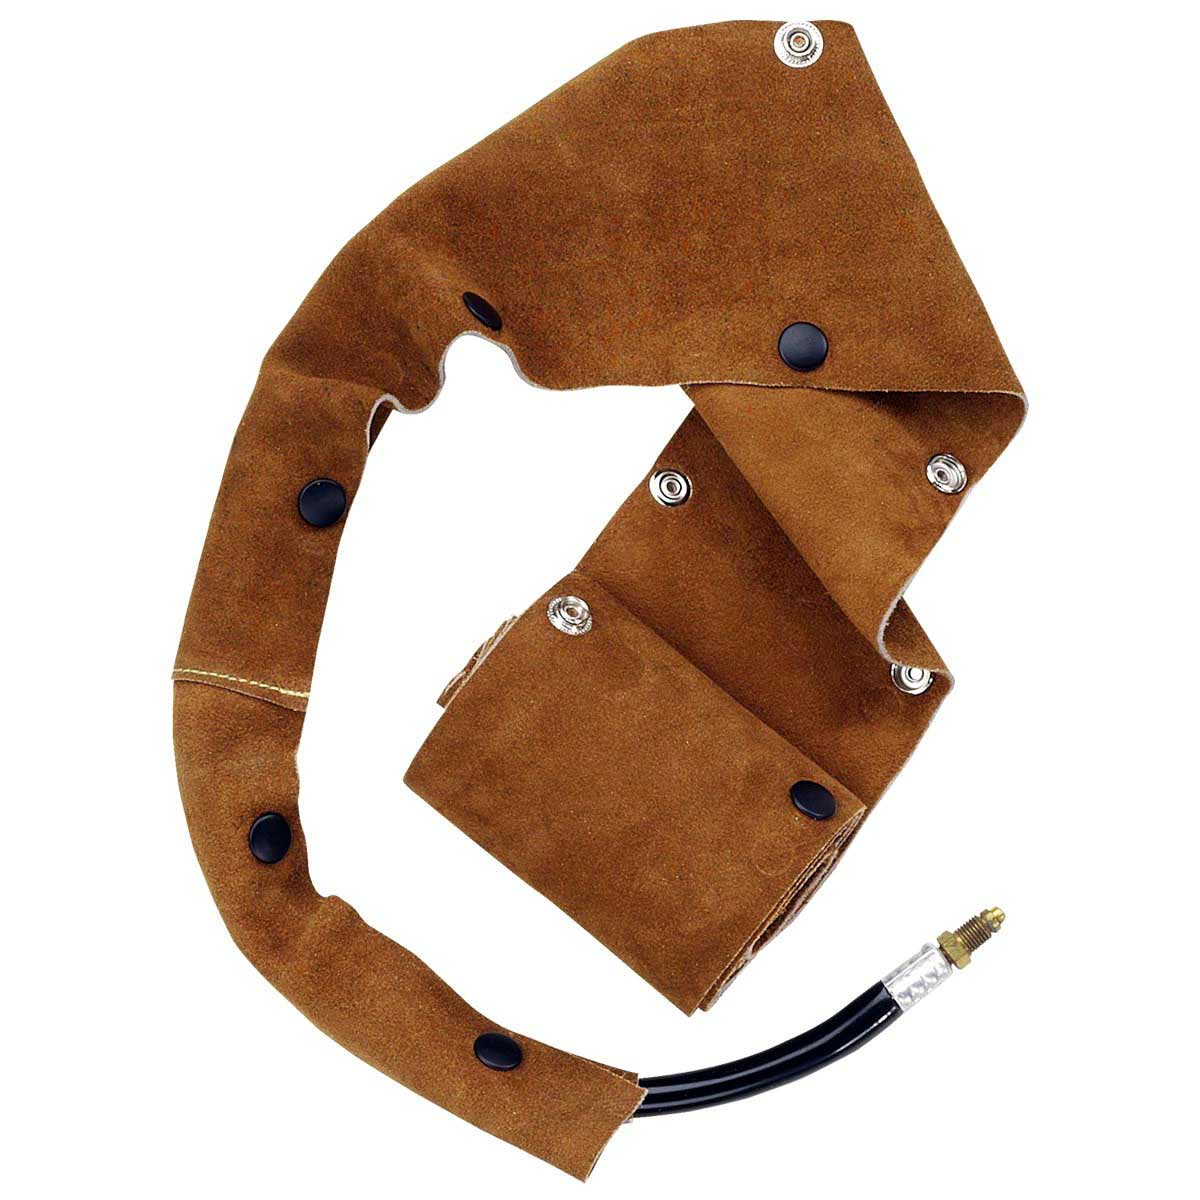 1 1/4 INCH DIAMETER HEAVY DUTY LEATHER CABLE COVER. Pack 1. 1 1/4